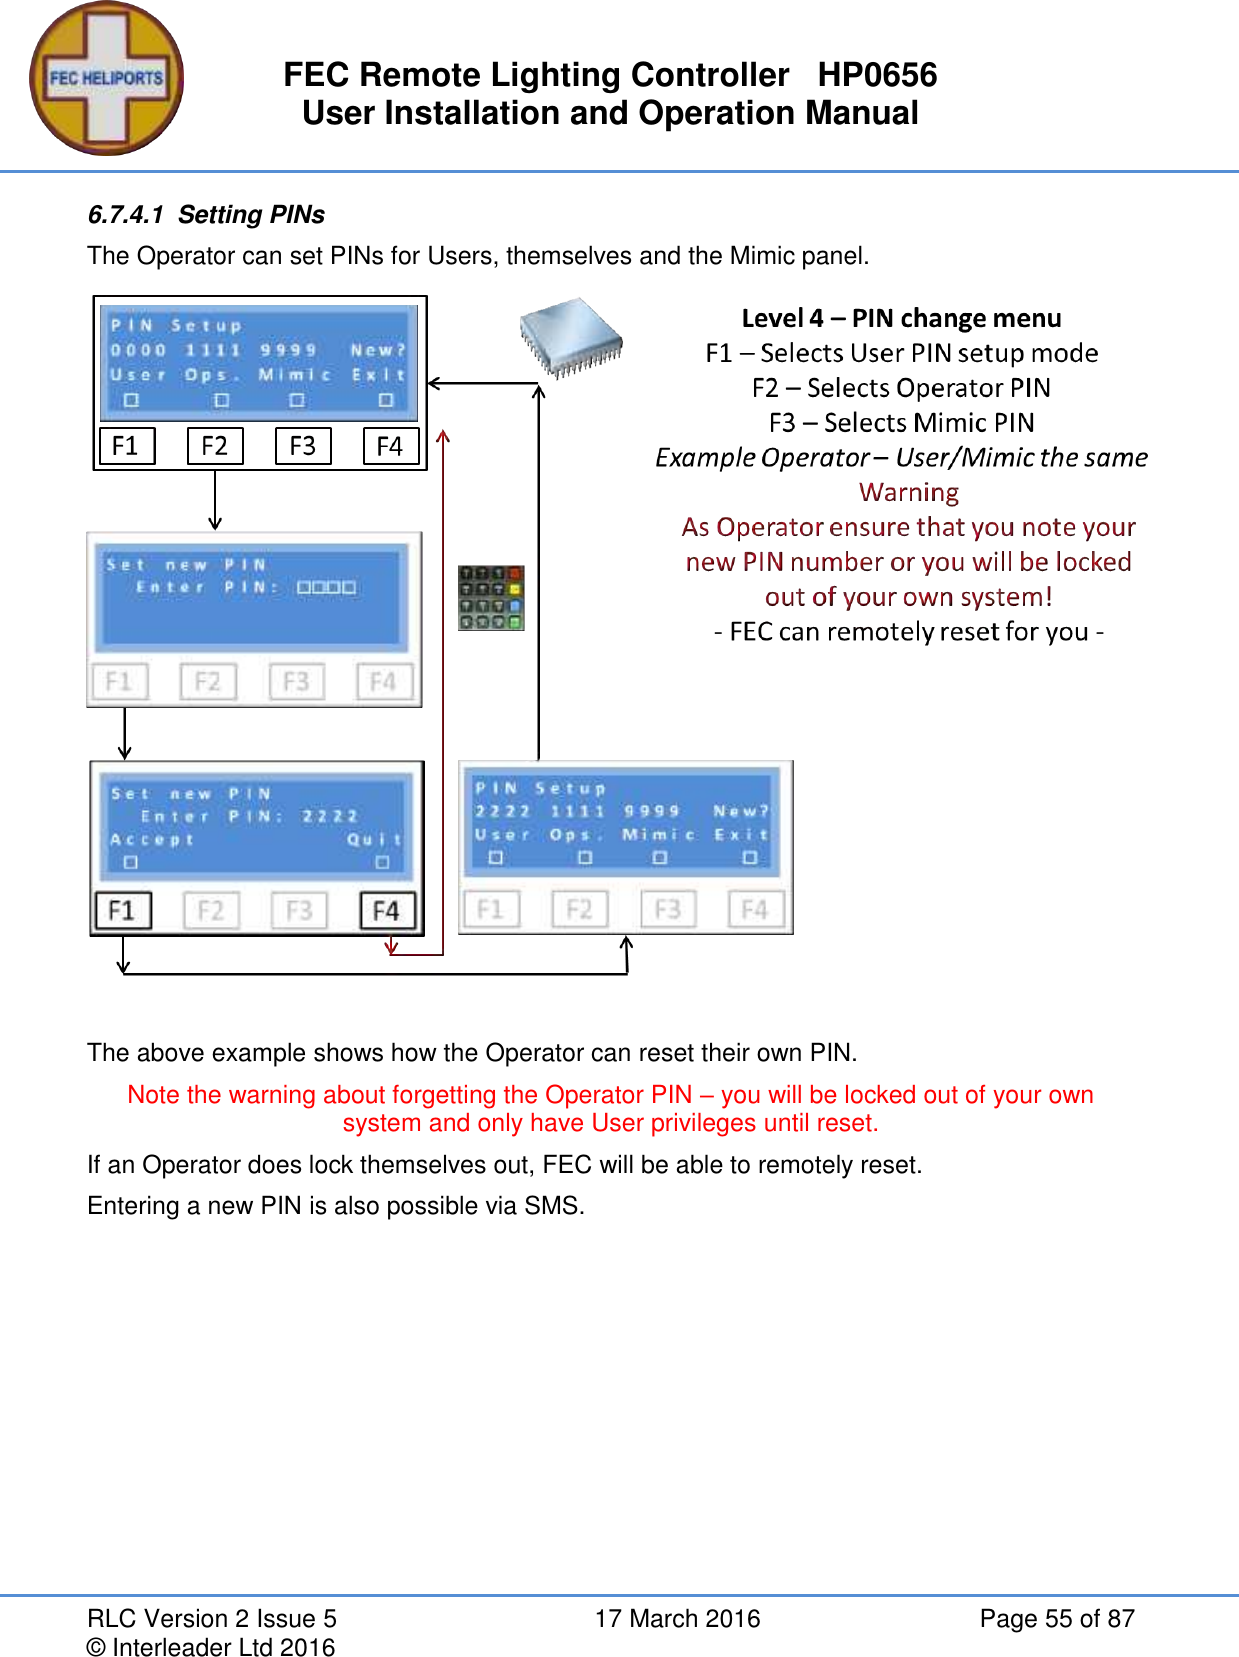 FEC Remote Lighting Controller   HP0656 User Installation and Operation Manual RLC Version 2 Issue 5  17 March 2016  Page 55 of 87 © Interleader Ltd 2016 6.7.4.1  Setting PINs The Operator can set PINs for Users, themselves and the Mimic panel.   The above example shows how the Operator can reset their own PIN. Note the warning about forgetting the Operator PIN – you will be locked out of your own system and only have User privileges until reset. If an Operator does lock themselves out, FEC will be able to remotely reset. Entering a new PIN is also possible via SMS.    